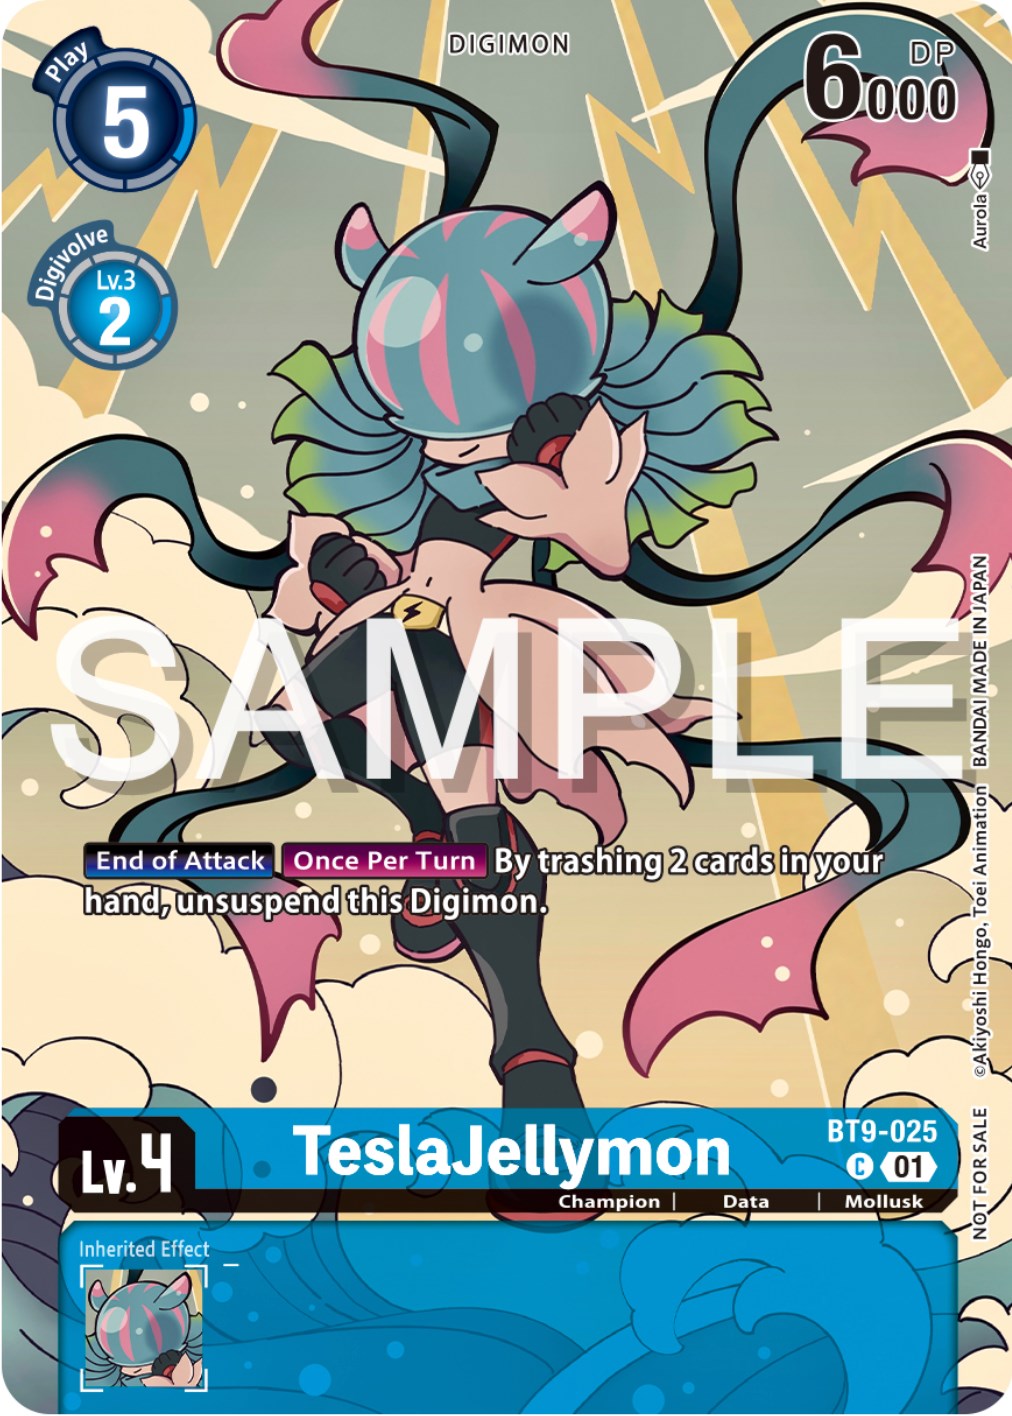 TeslaJellymon [BT9-025] (Digimon Illustration Competition Pack 2023) [X Record Promos] | Anubis Games and Hobby